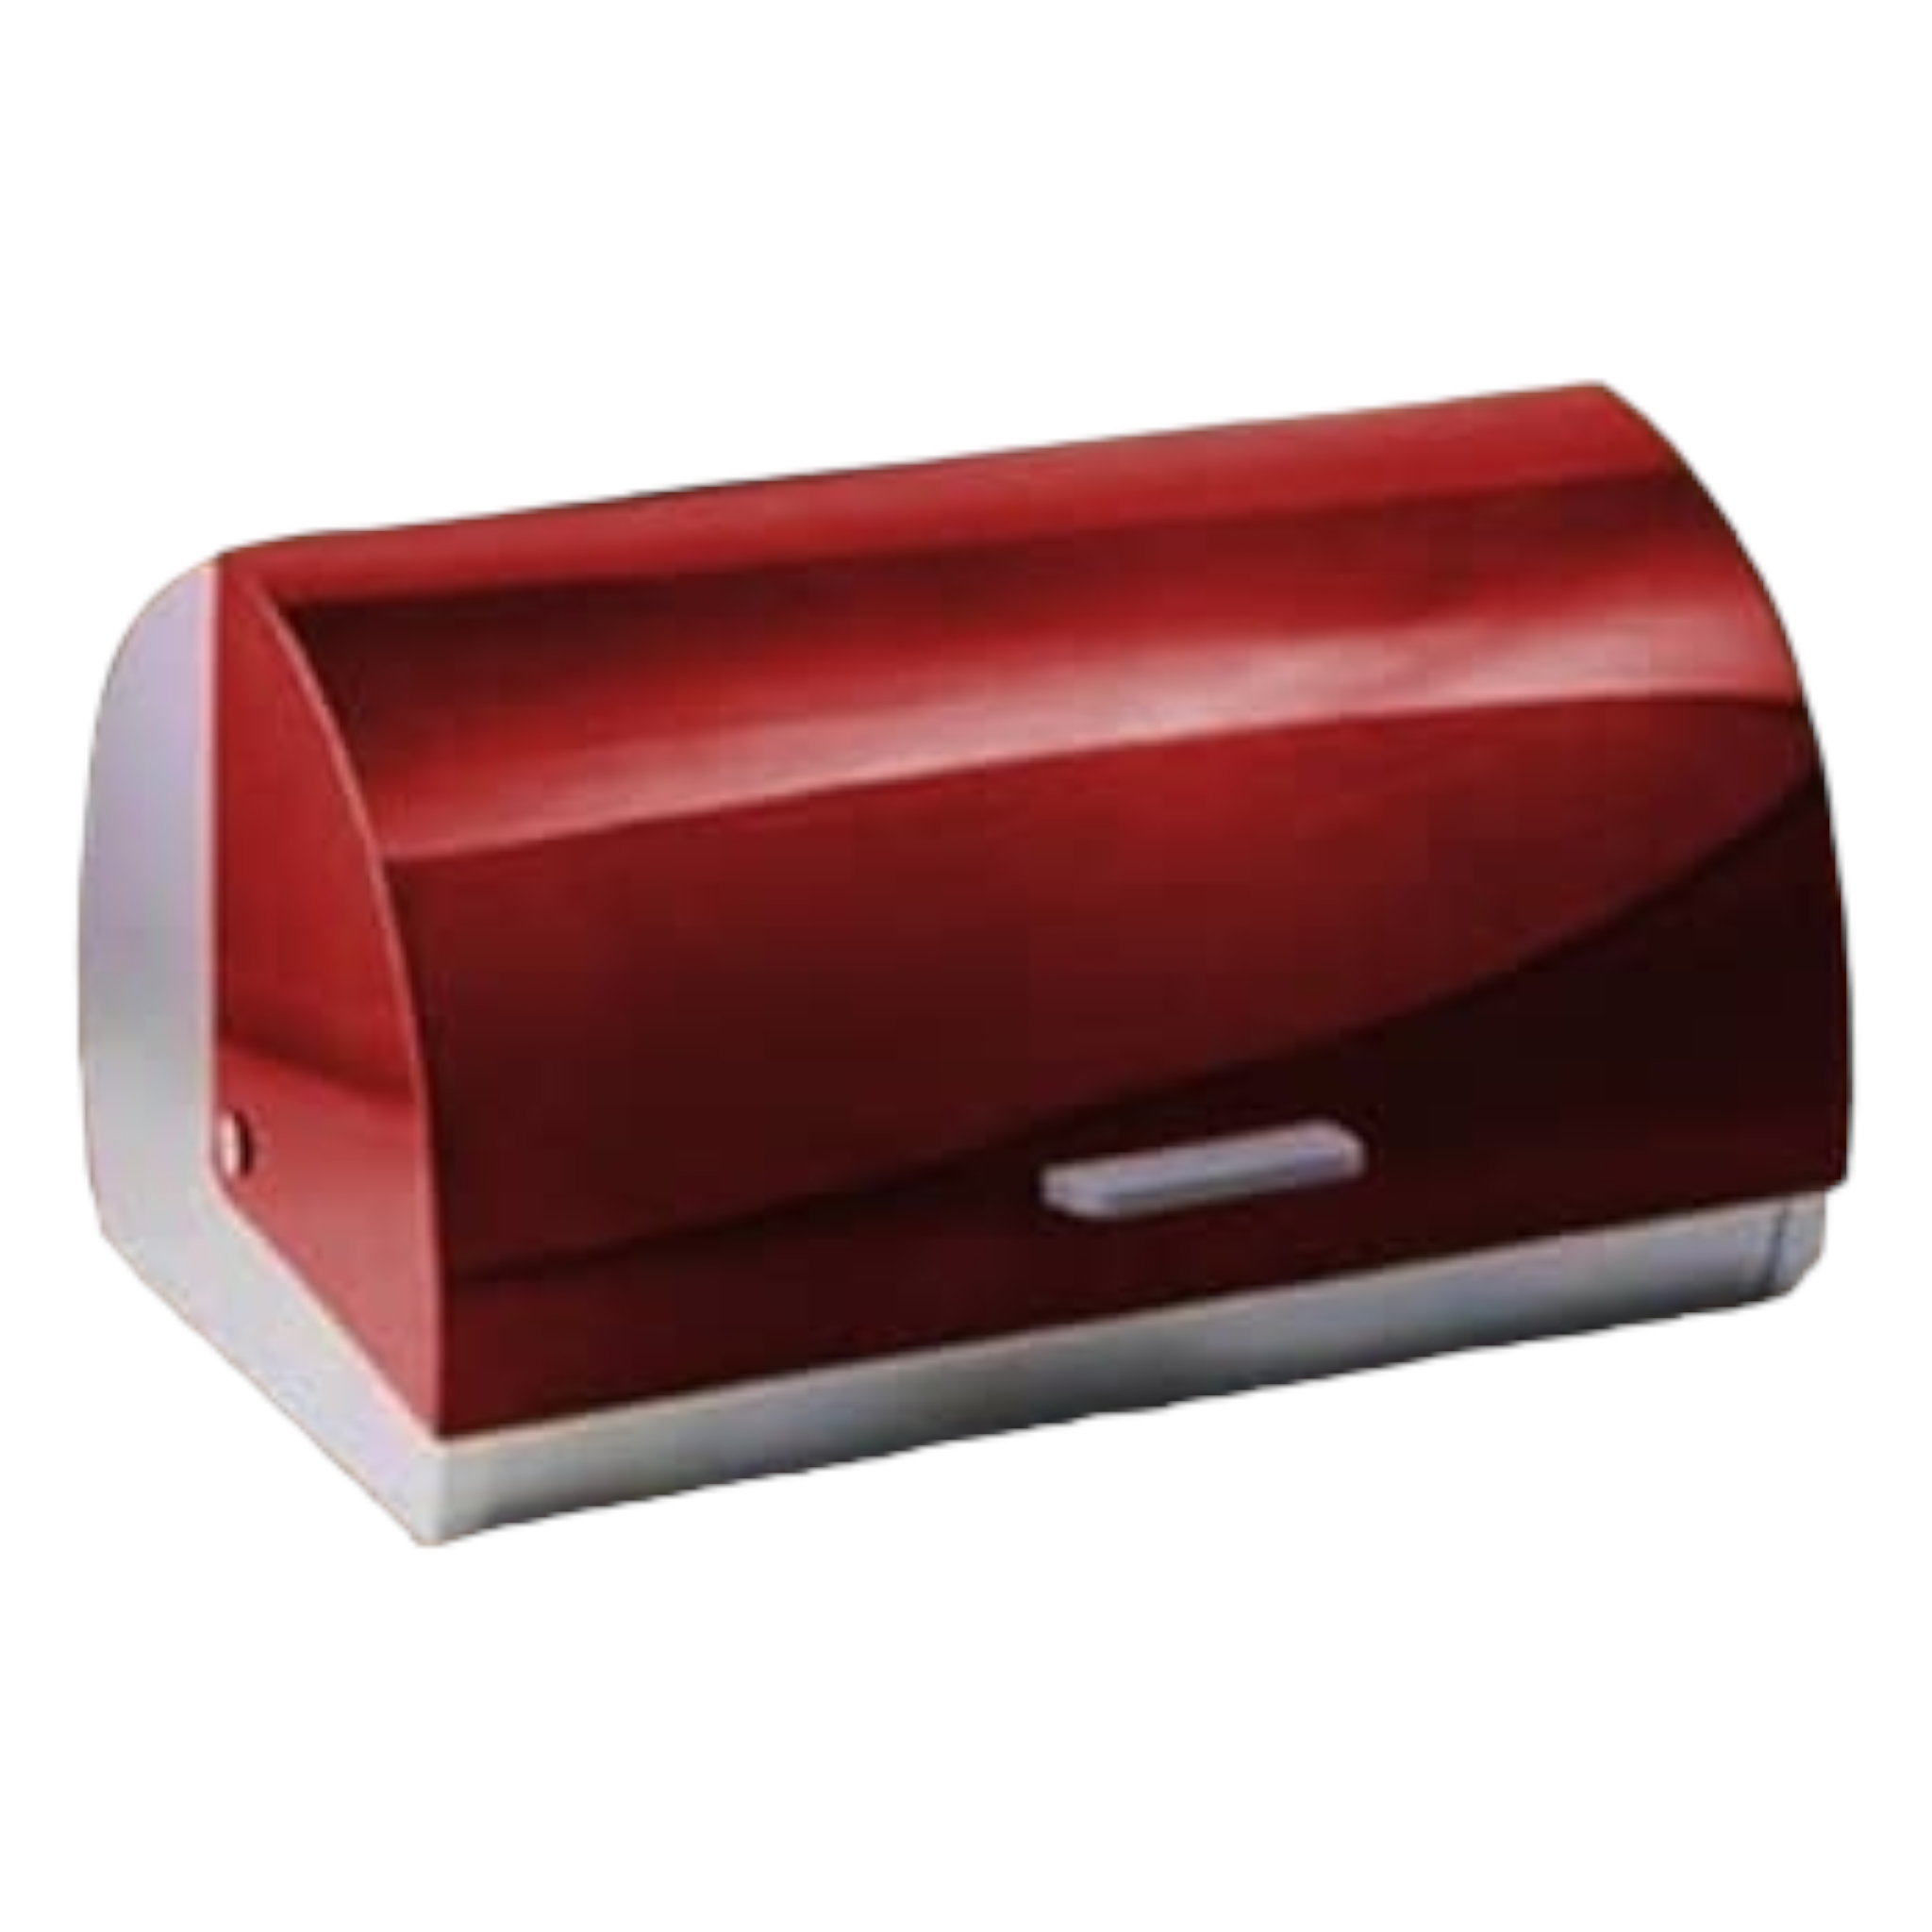 Totally Home Bread Bin Stainless Steel with Red Lid